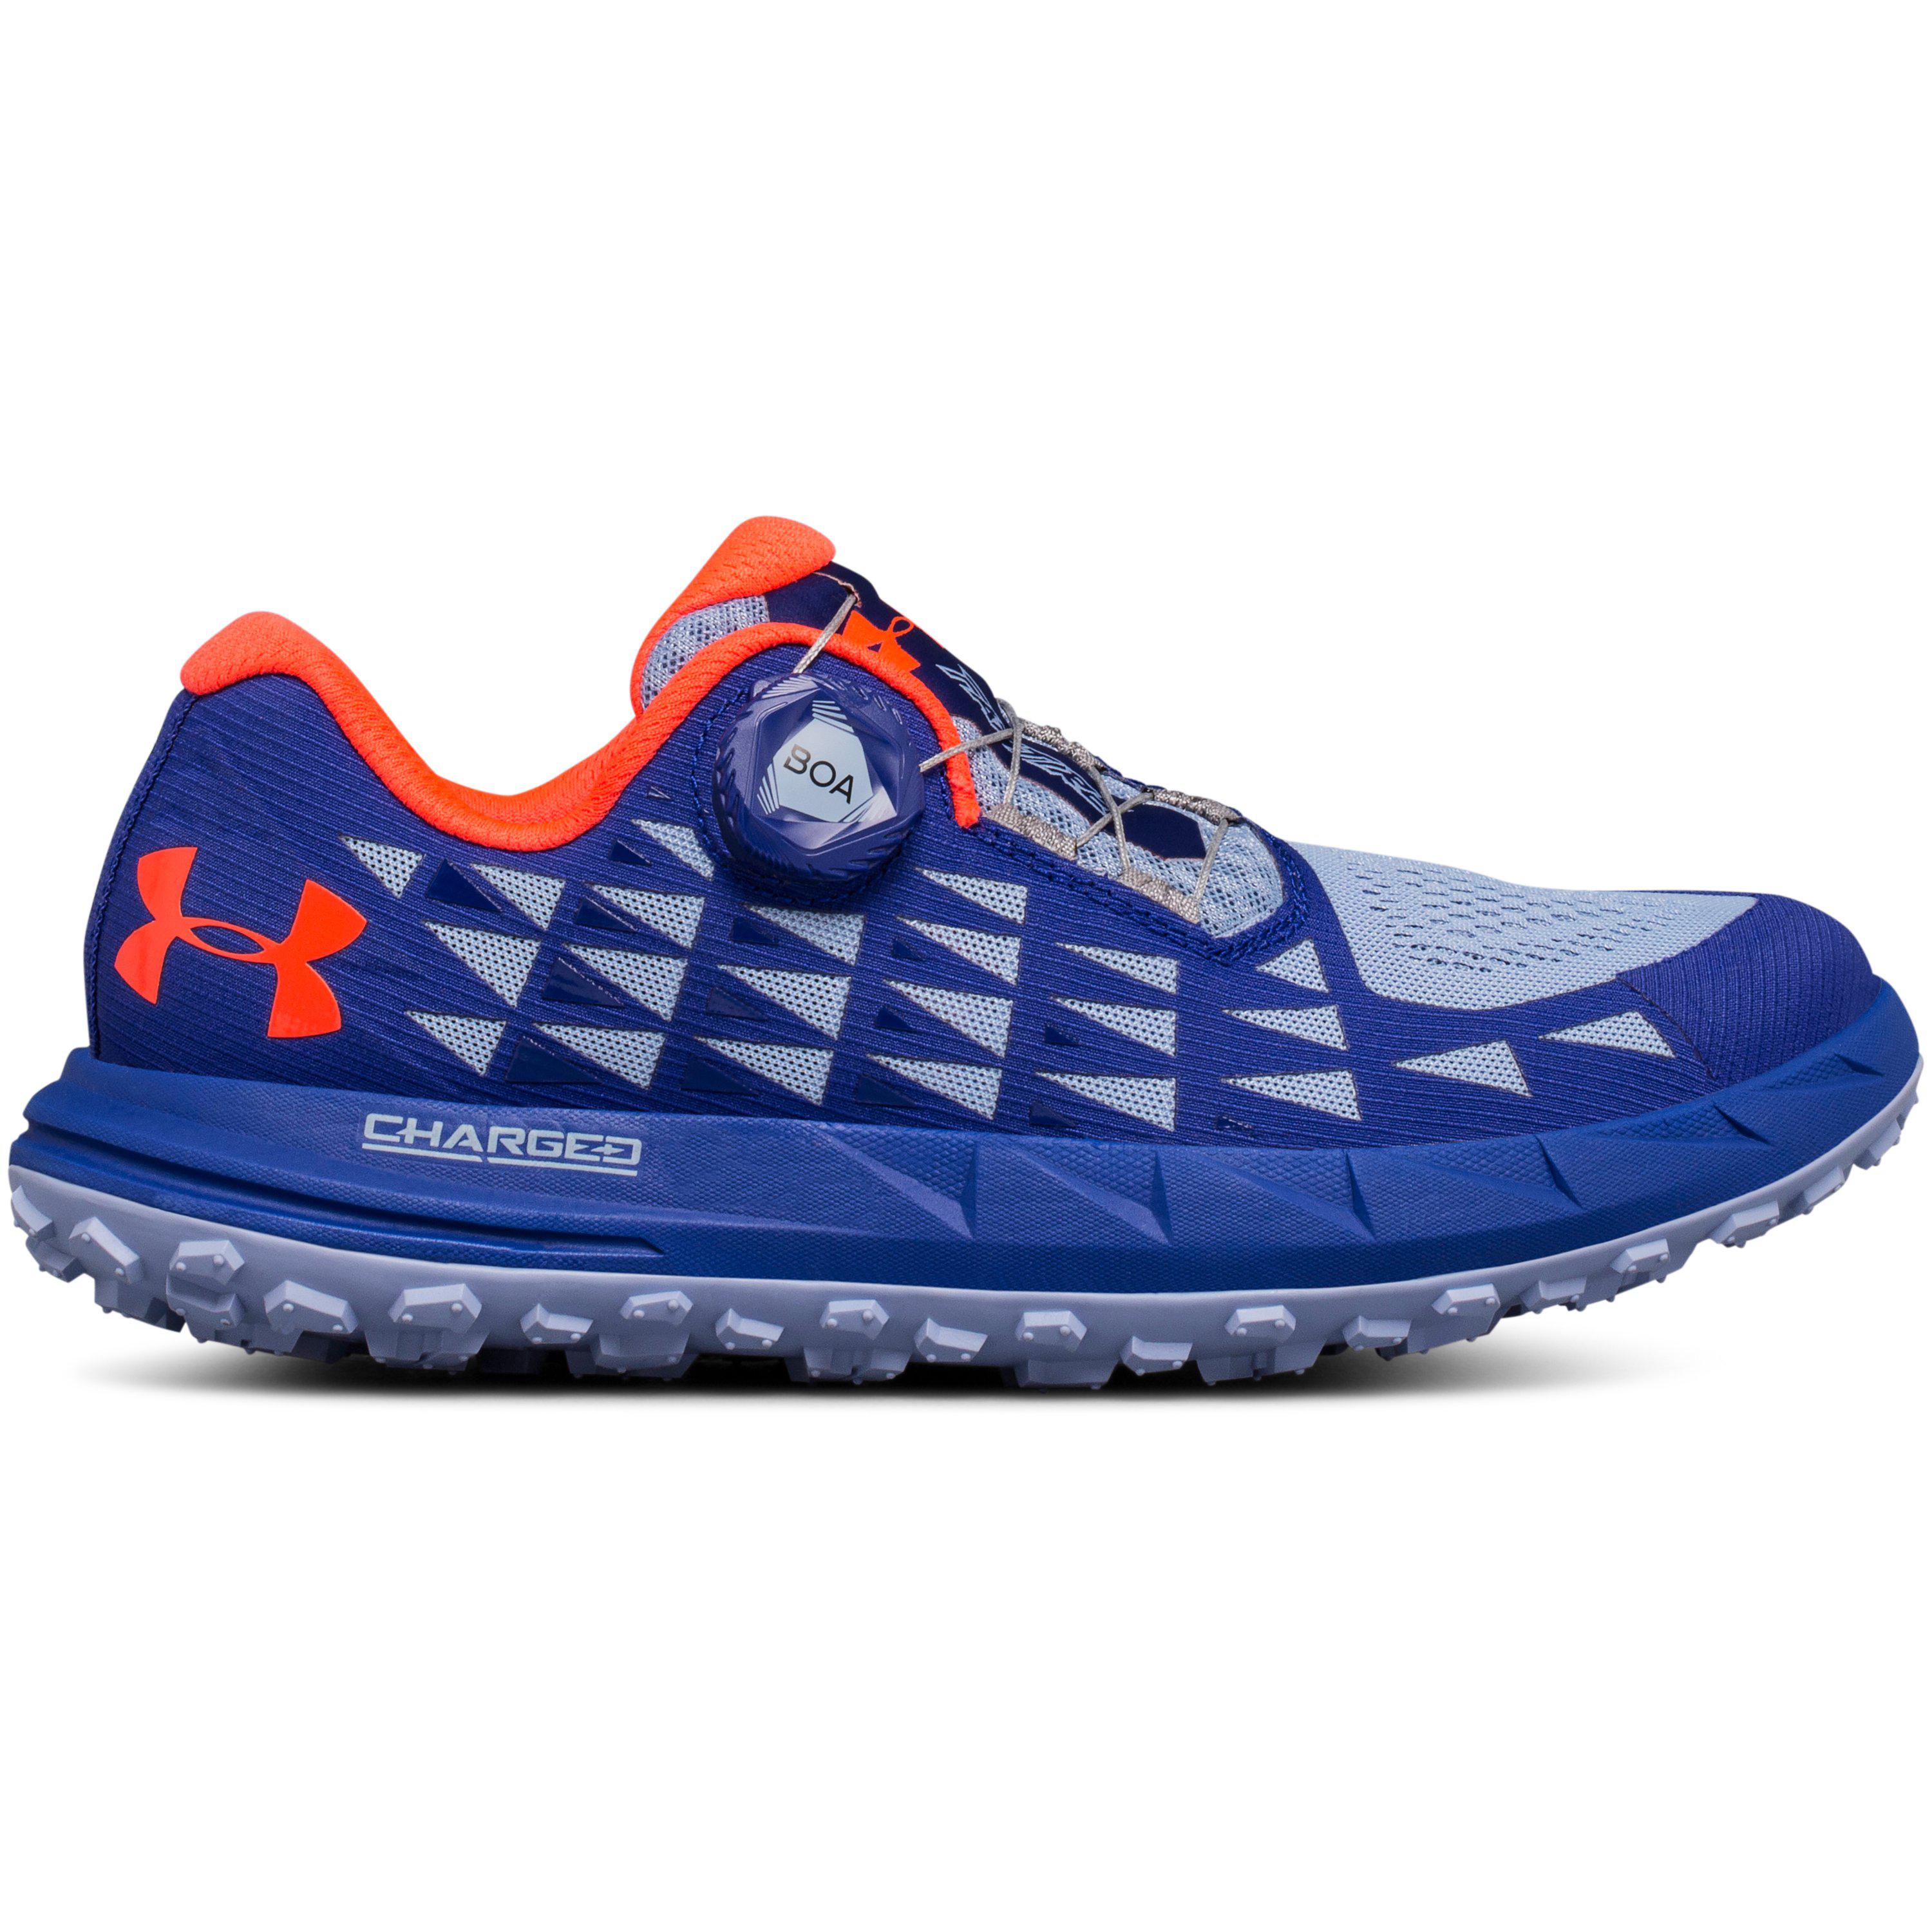 Lyst - Under Armour Women's Ua Fat Tire 3 Running Shoes in Blue